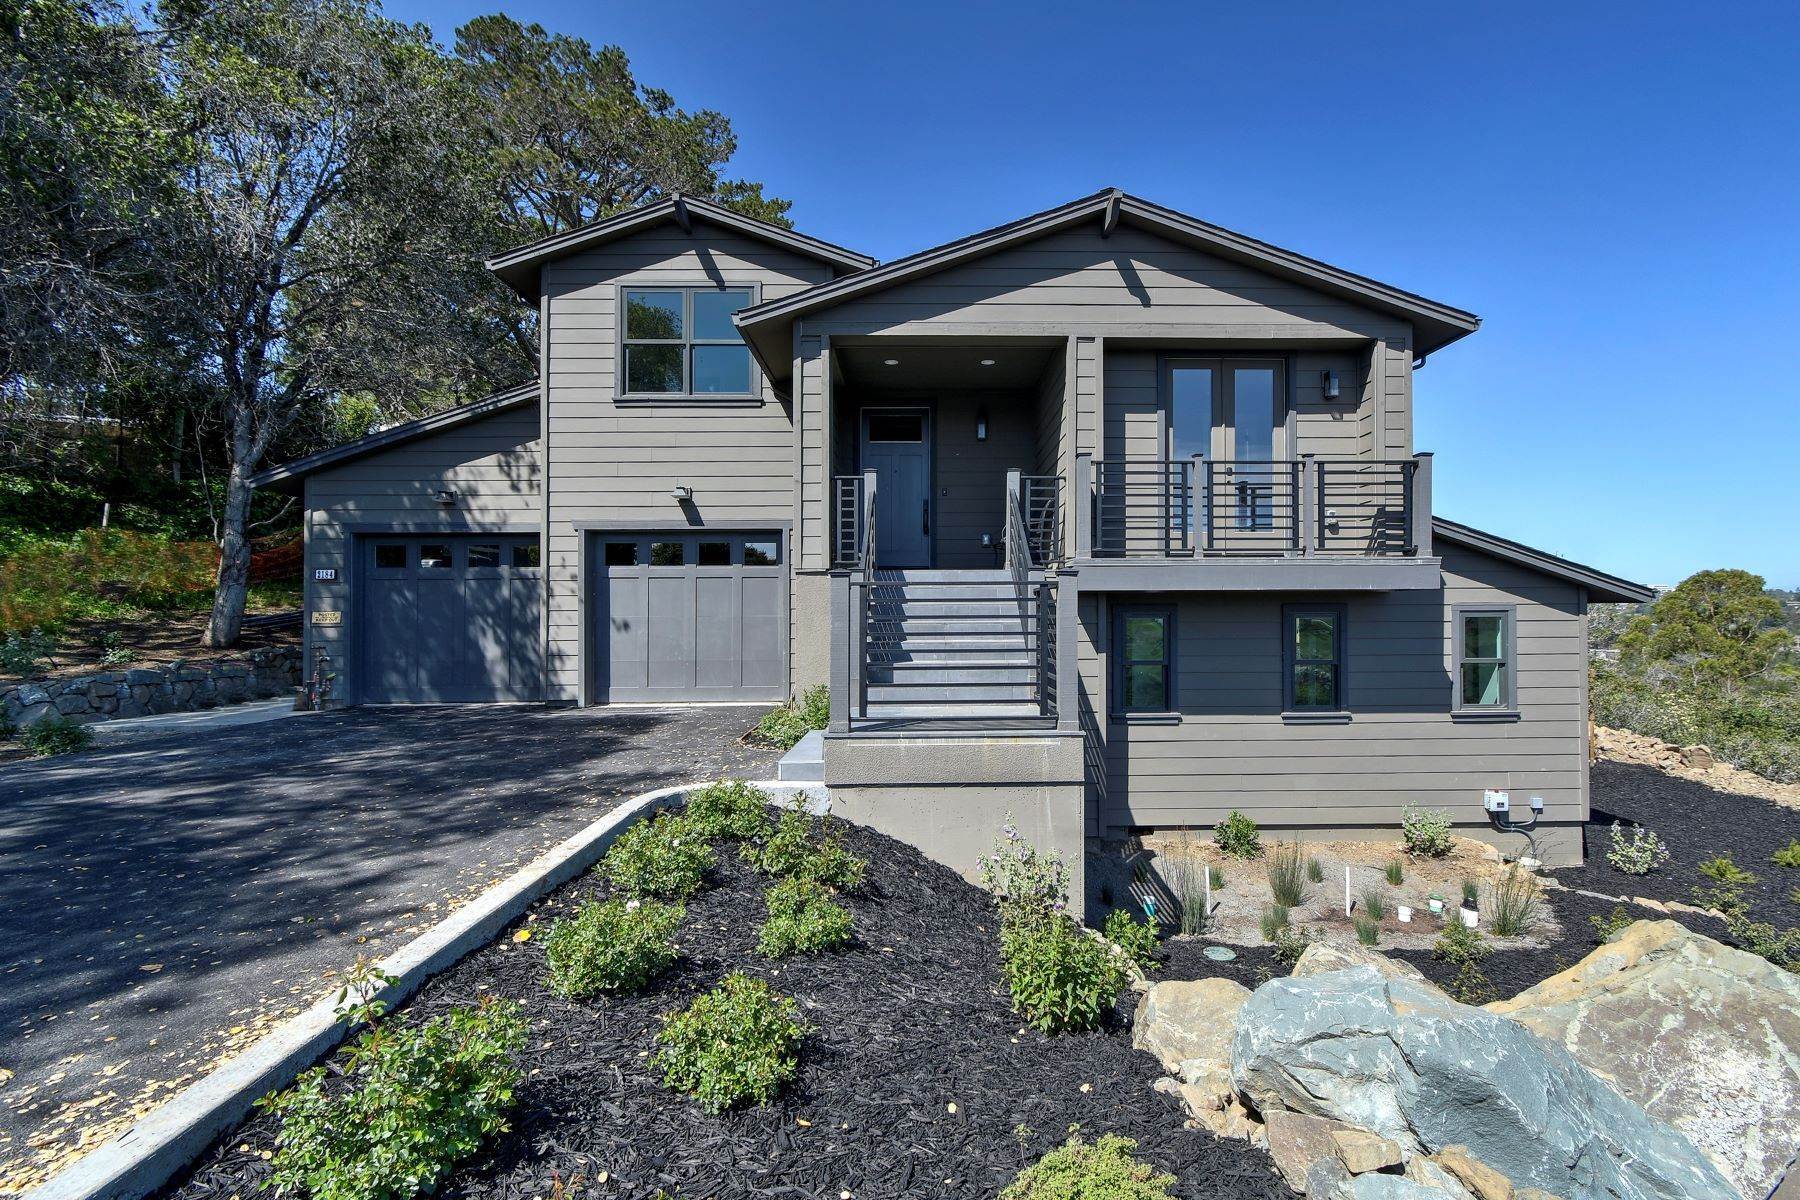 Property for Sale at New Custom Built Home with Incredible Views 2184 Cobblehill Place, San Mateo, CA 94402